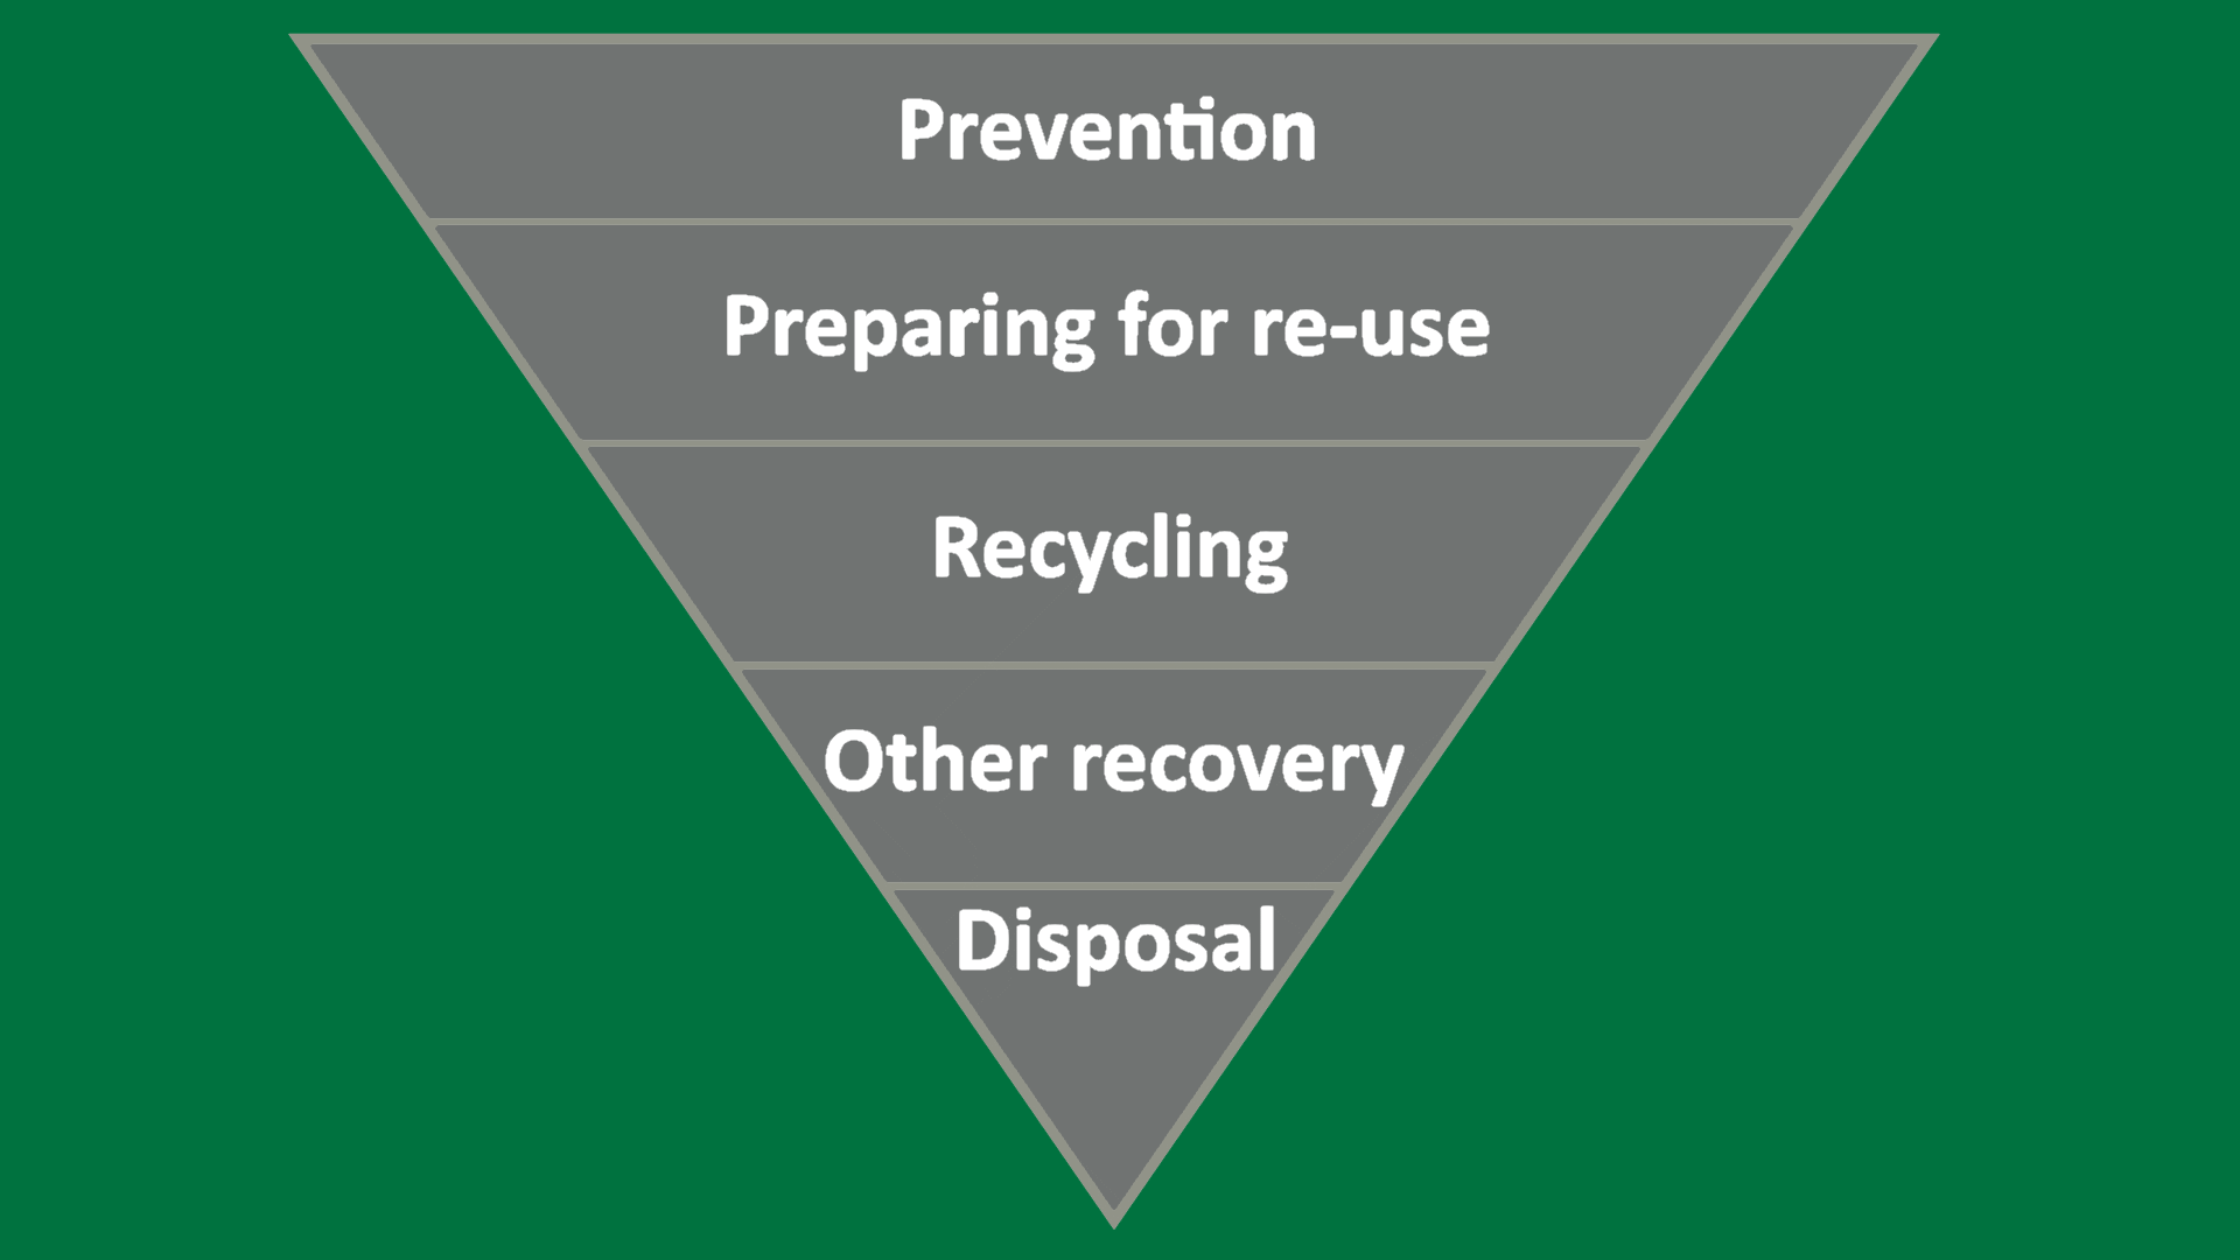 Waste hierarchy triangle promoting how to reduce waste